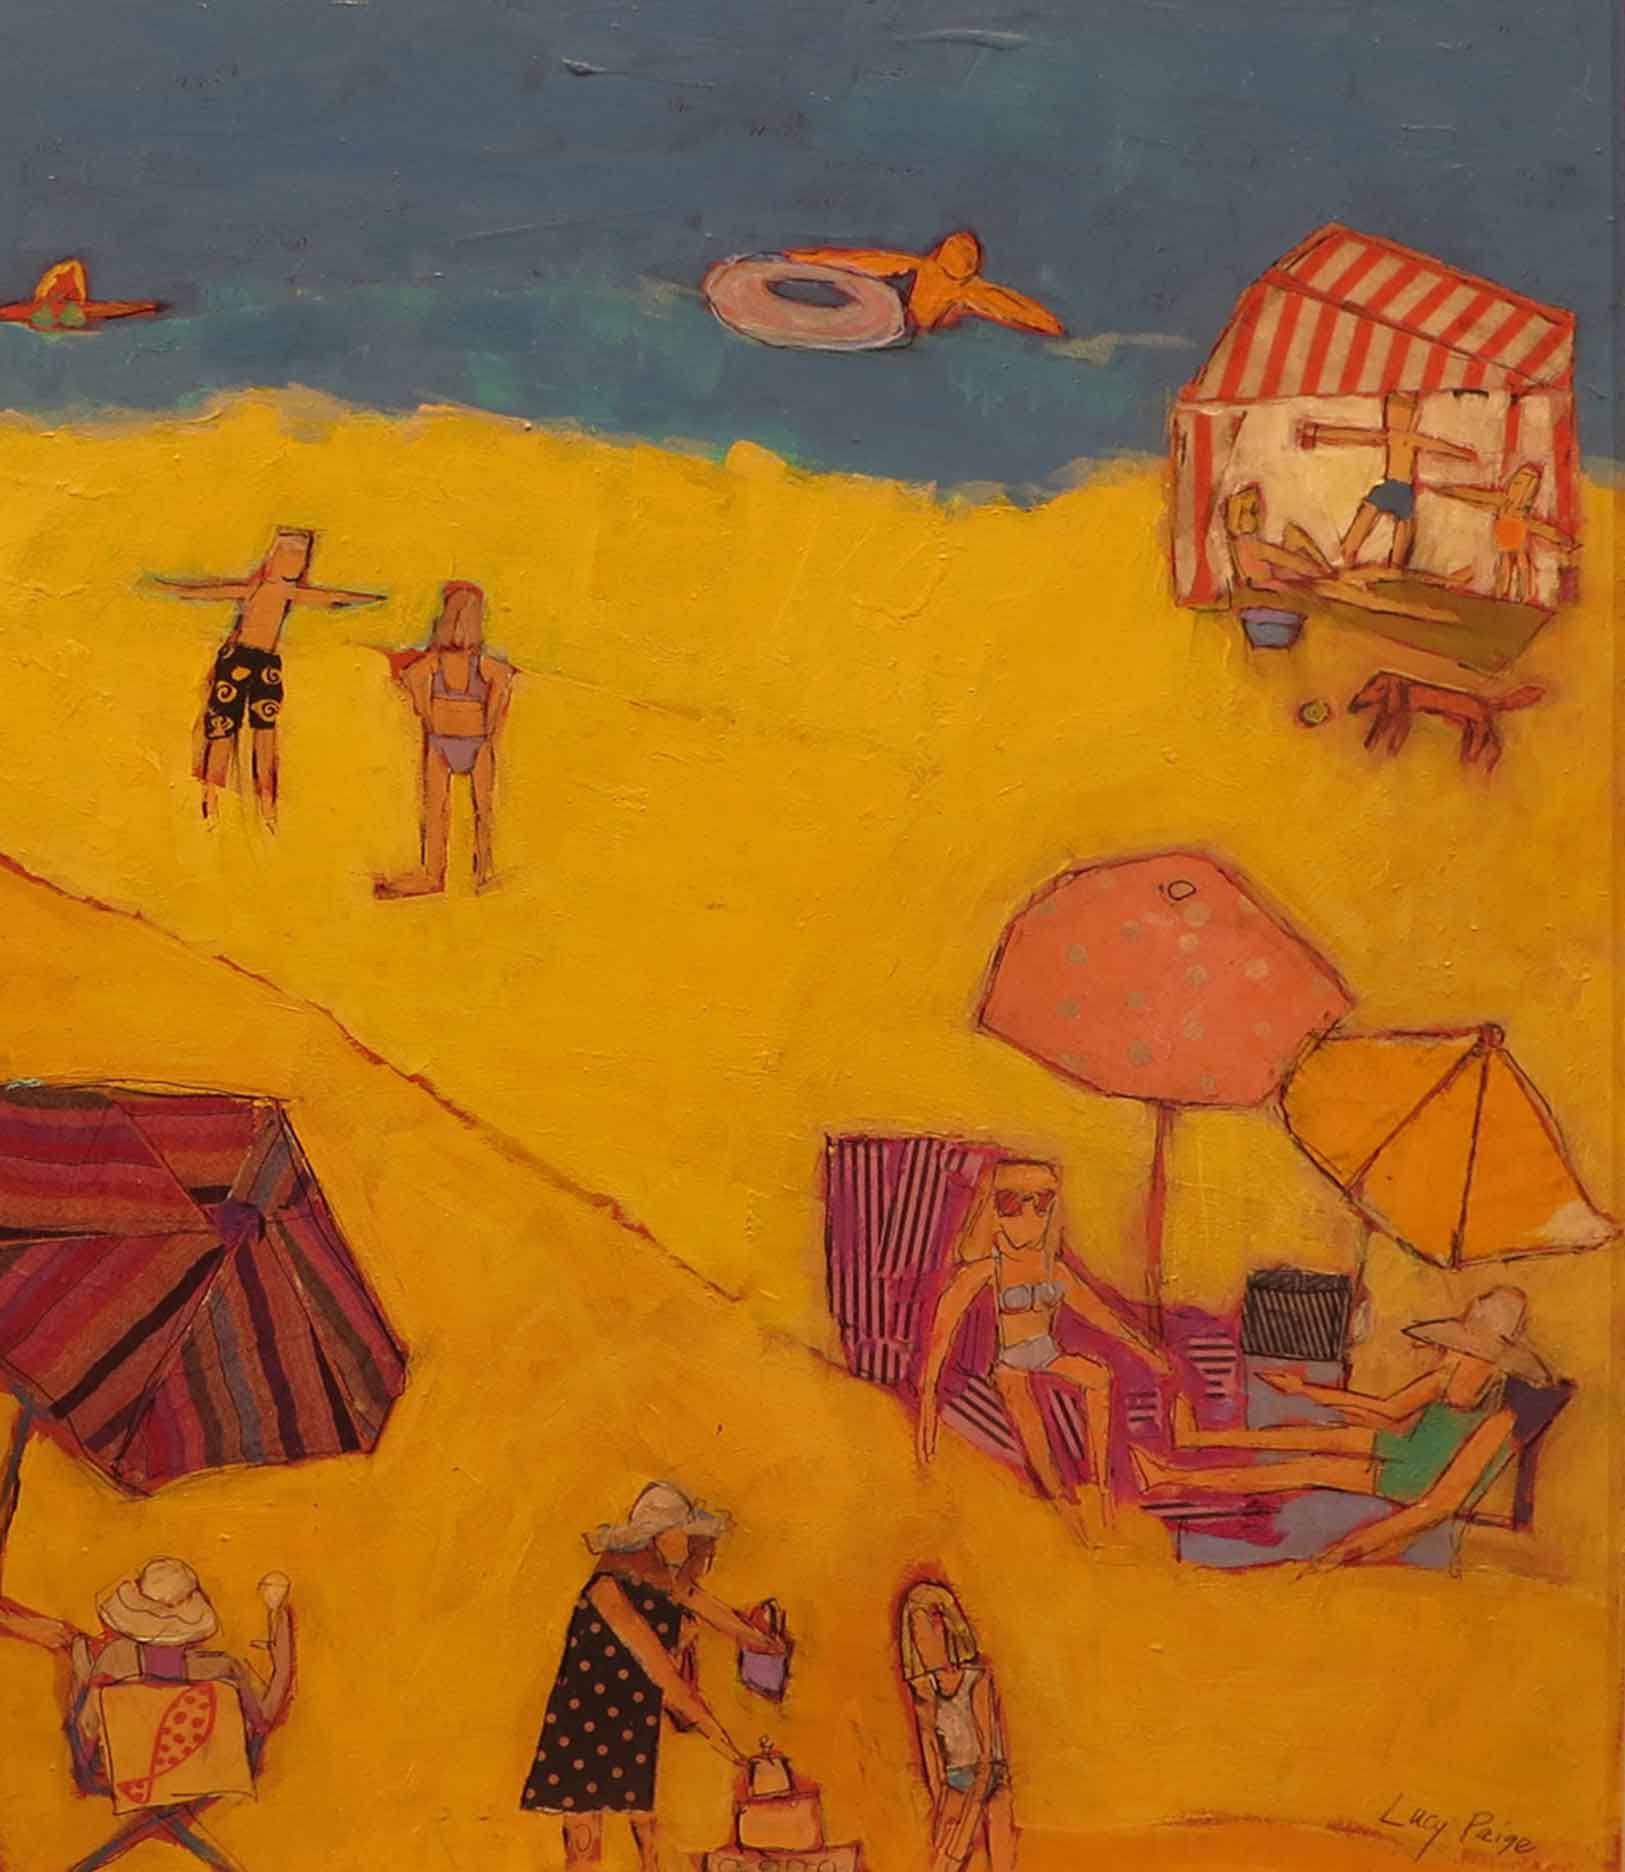 Sunbathers of all shapes and sizes laze in the sun or play in the ocean in Paige’s “Beach Day” series, marking a departure from her previous abstract paintings. Bright, lively and charming, the work is quintessentially tropical but never kitschy.